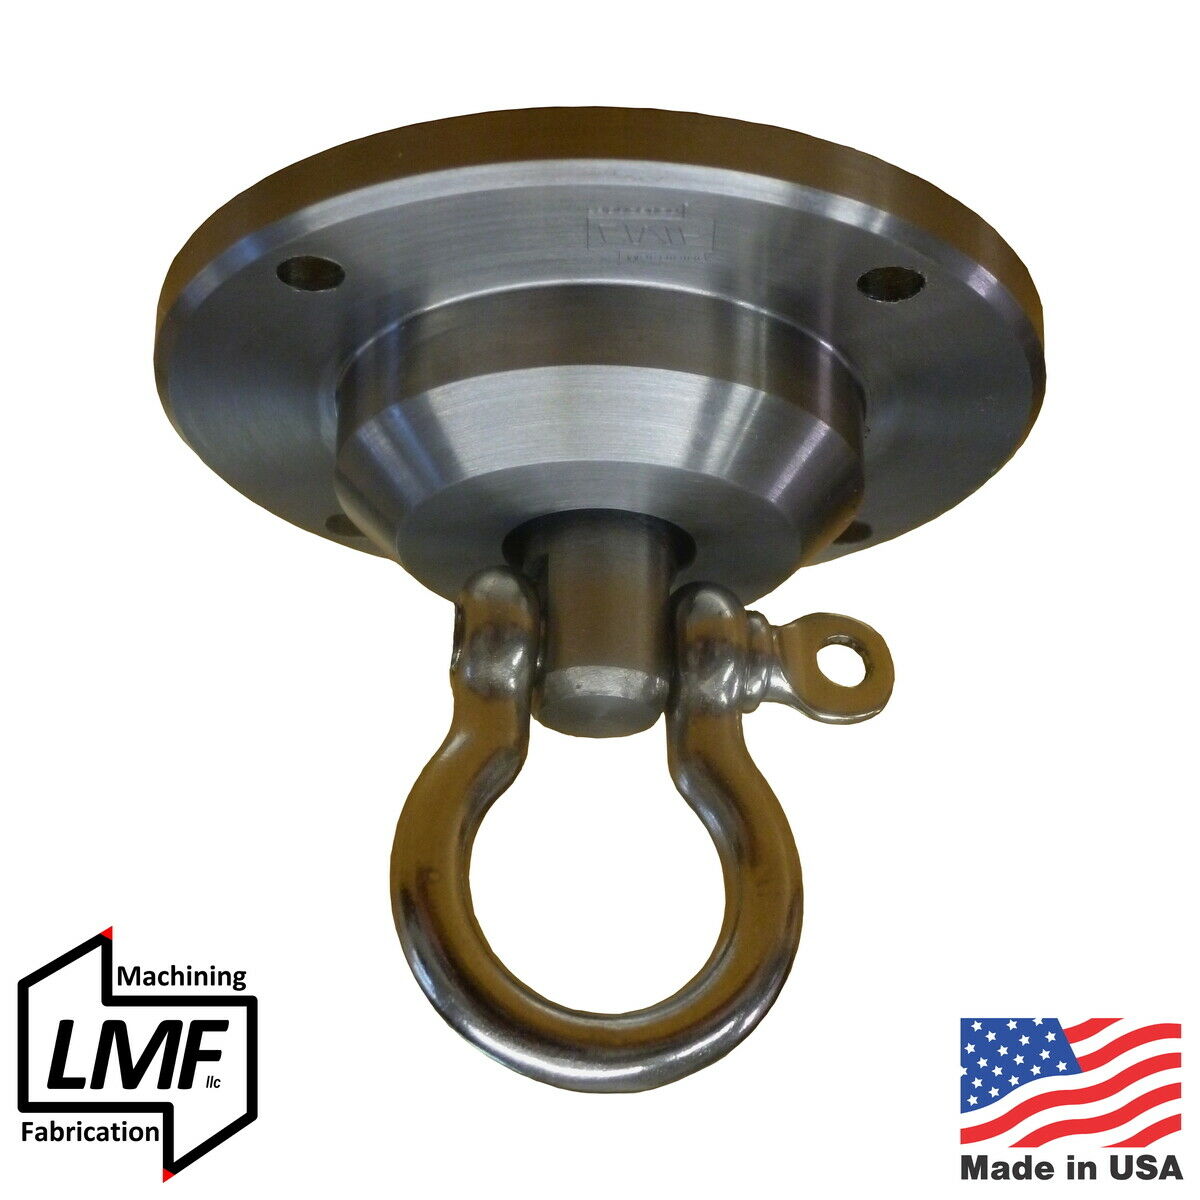 Lmf Speed Bag Swivel - Fast, Smooth, Heavy Duty - Made In Usa